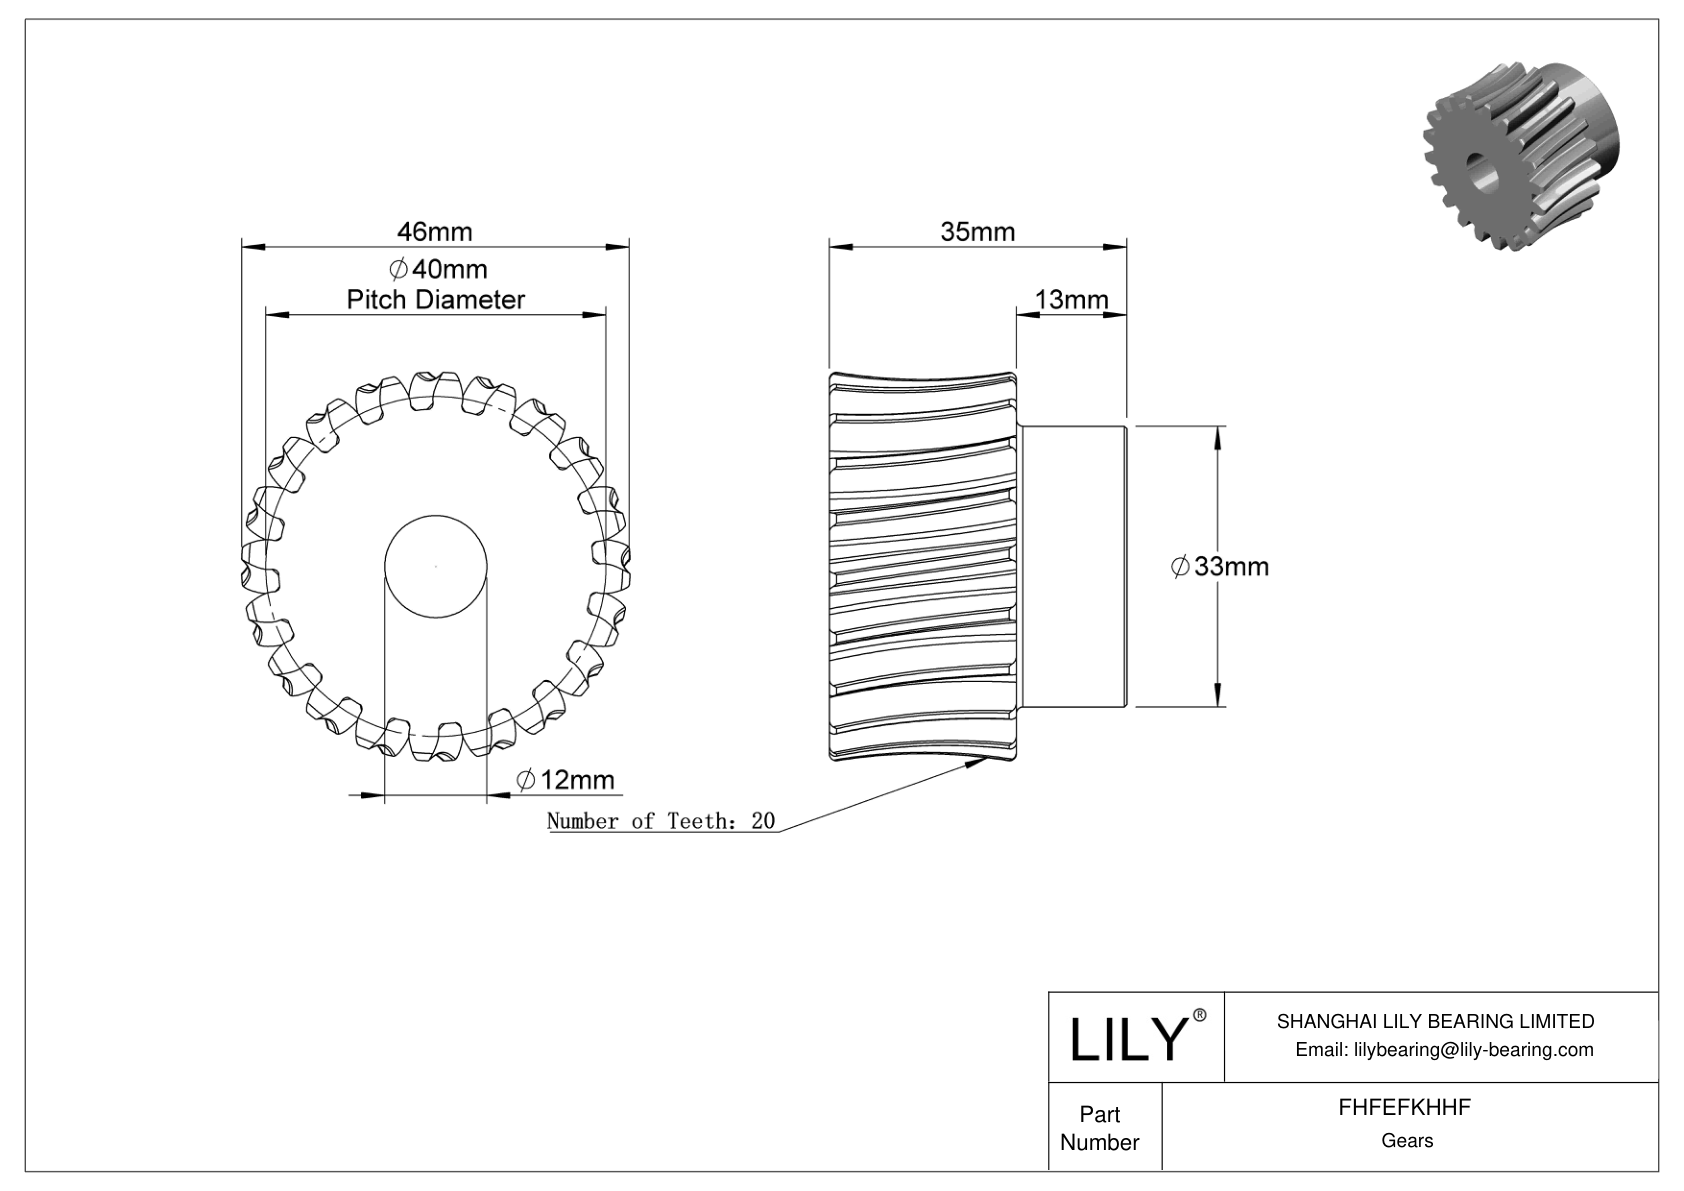 FHFEFKHHF Metric Worm Gears cad drawing